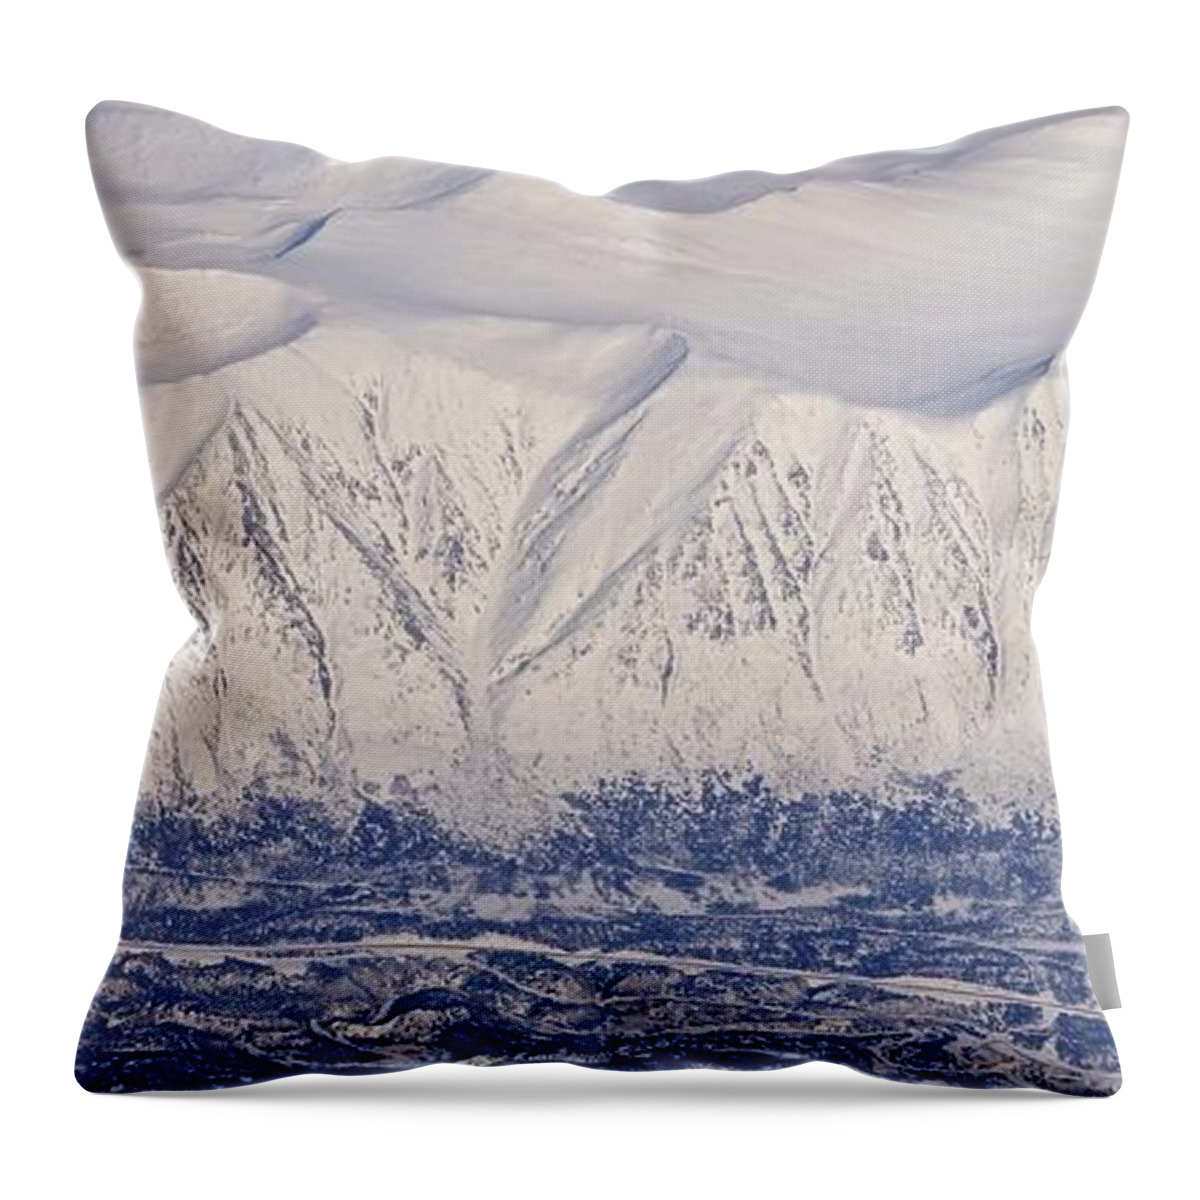 Photography Throw Pillow featuring the photograph Mountain Range by Sean Griffin